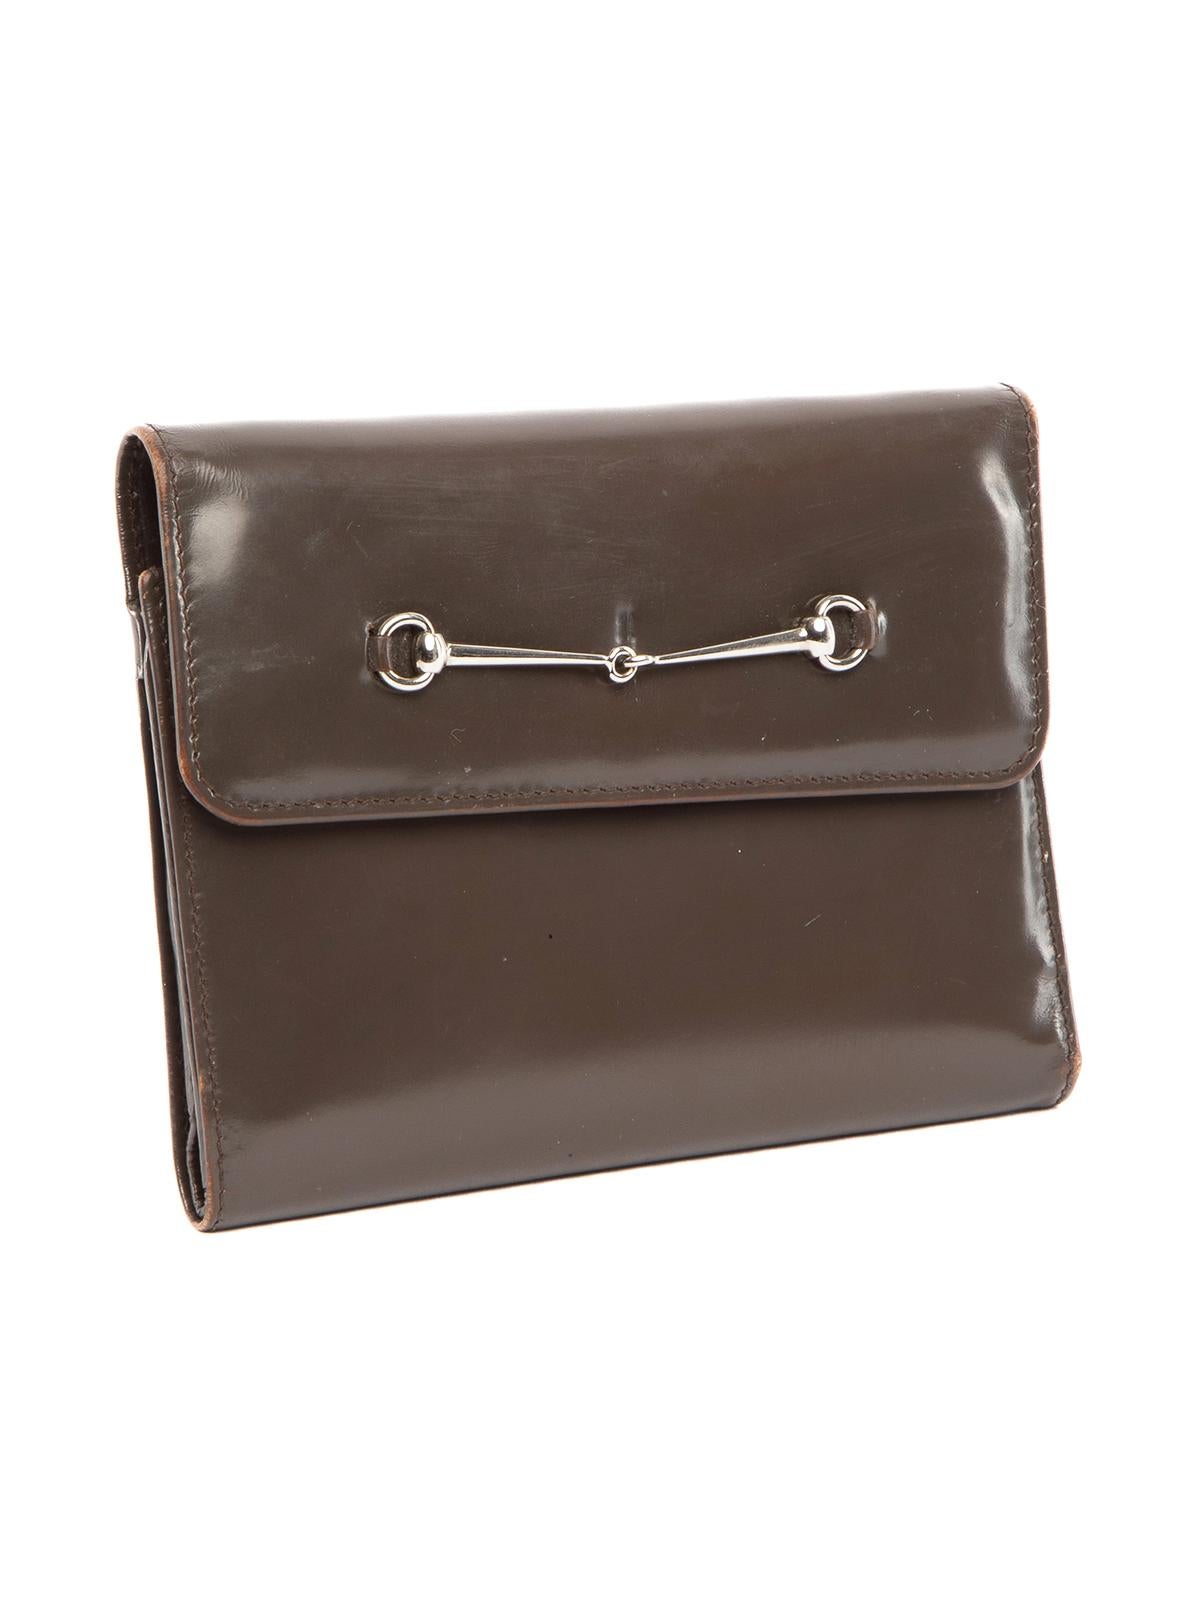 CONDITION is Good. General wear to wallet is evident. Moderate signs of wear to leather material all over and around the trim. Signs of wear to the interior on this used Gucci designer resale item. Details Colour - brown Material - leather Silver